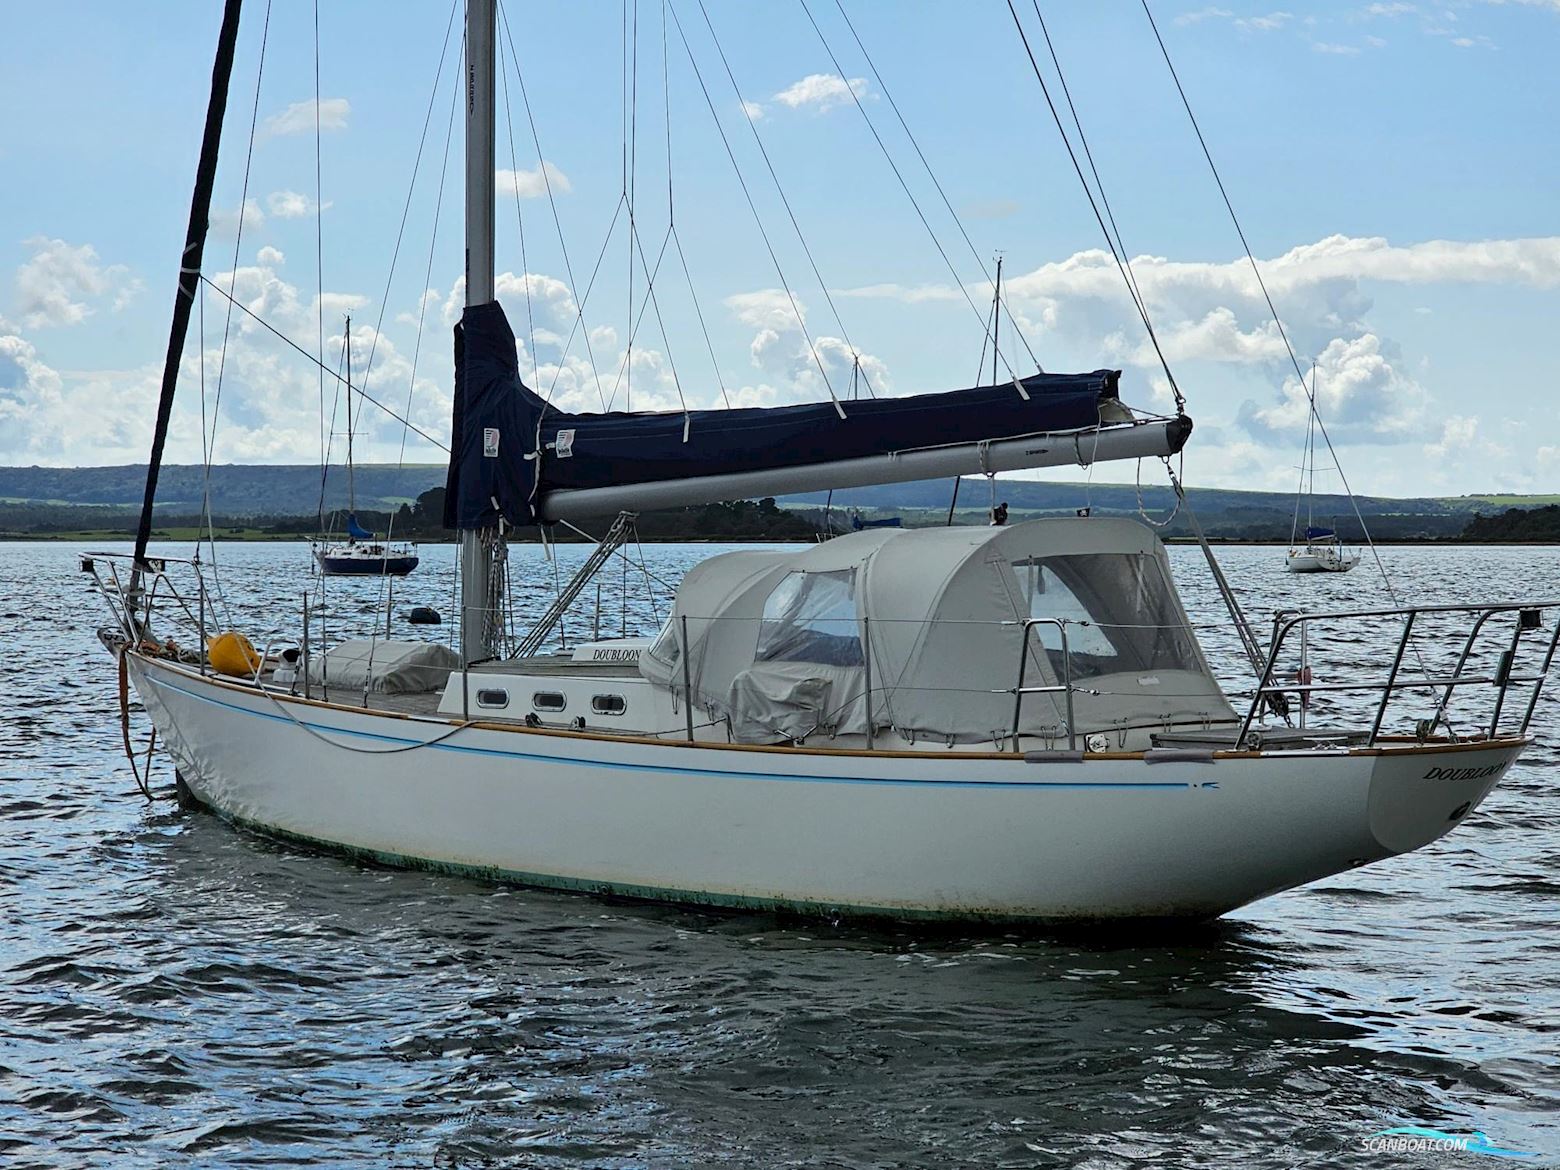 Unclassified Doubloon 36 Sailing boat 2003, with Sole Mini 26 engine, United Kingdom